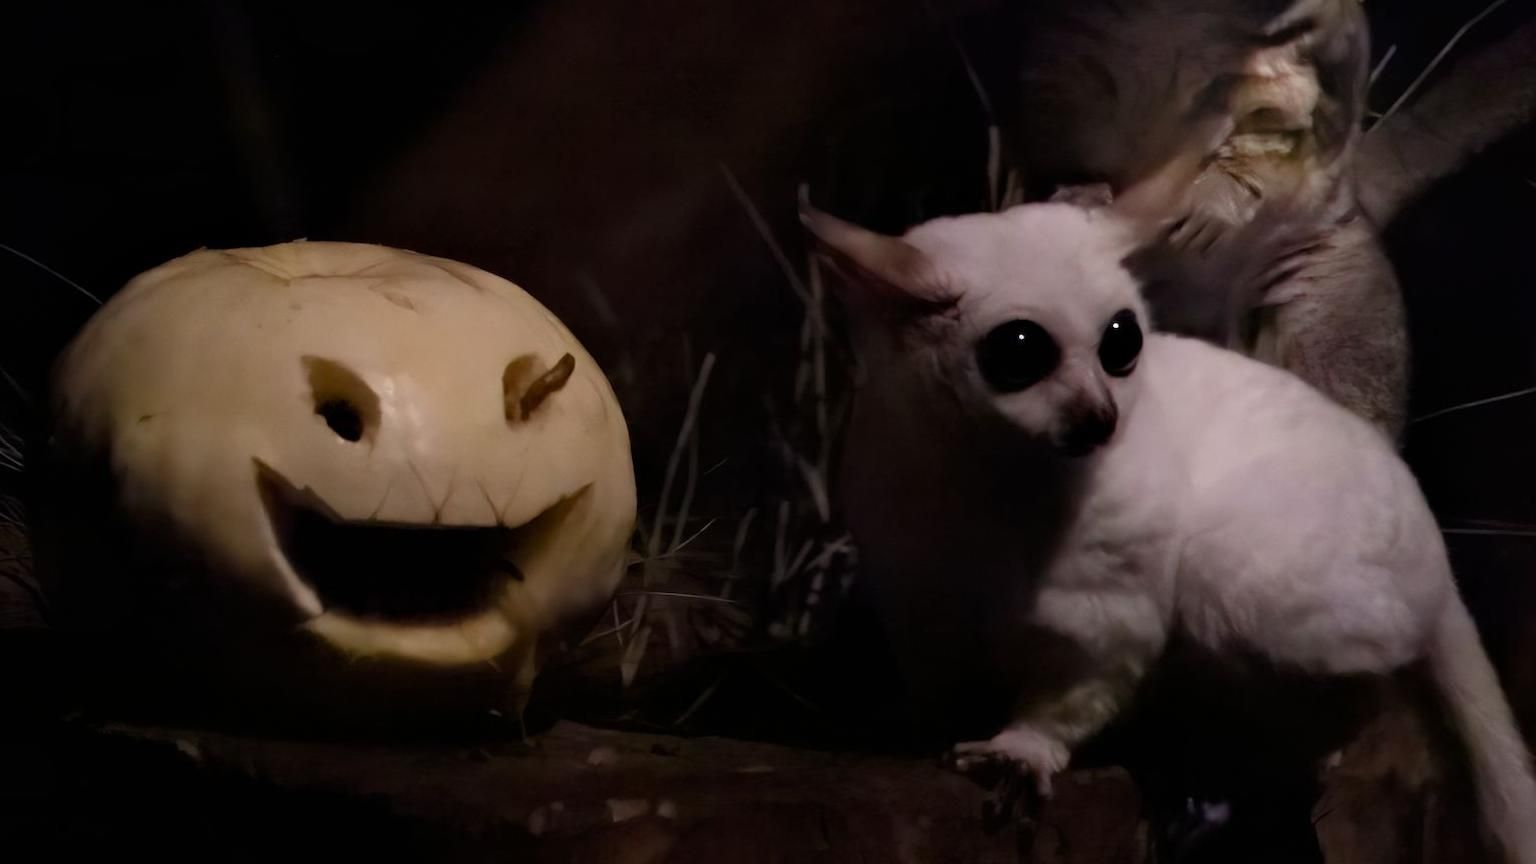 Ghost the bush baby with a white carved pumpkin